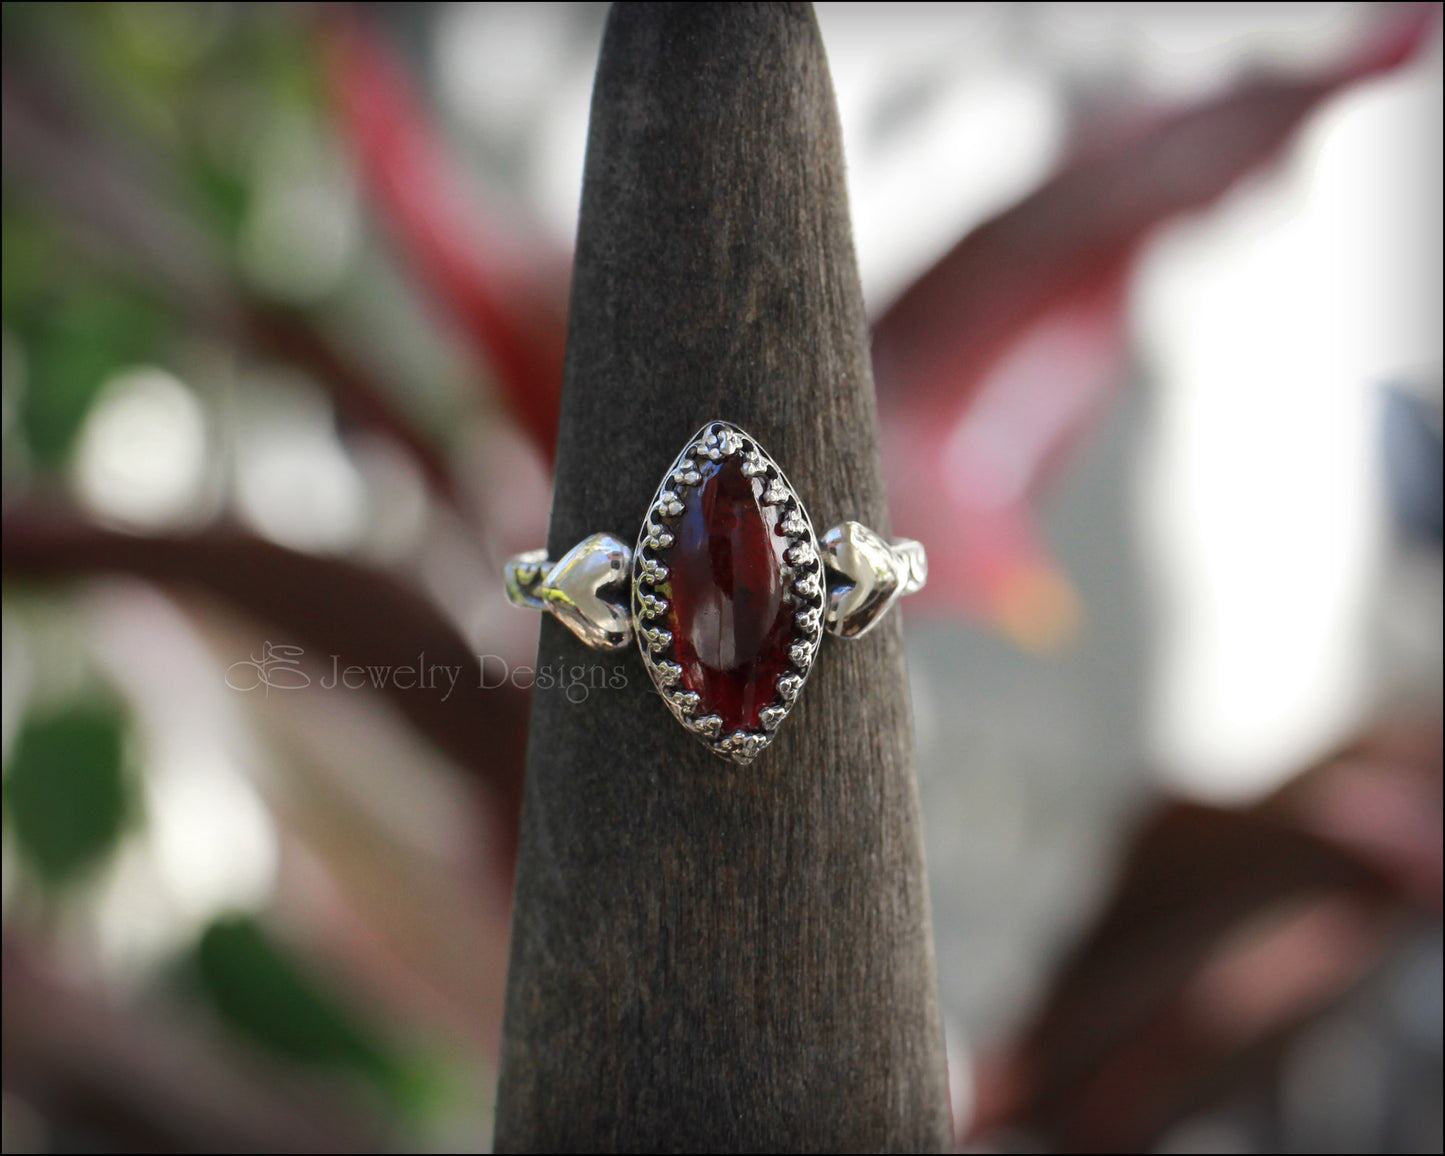 Victorian Style Sweetheart Ring - (choose stone) - LE Jewelry Designs